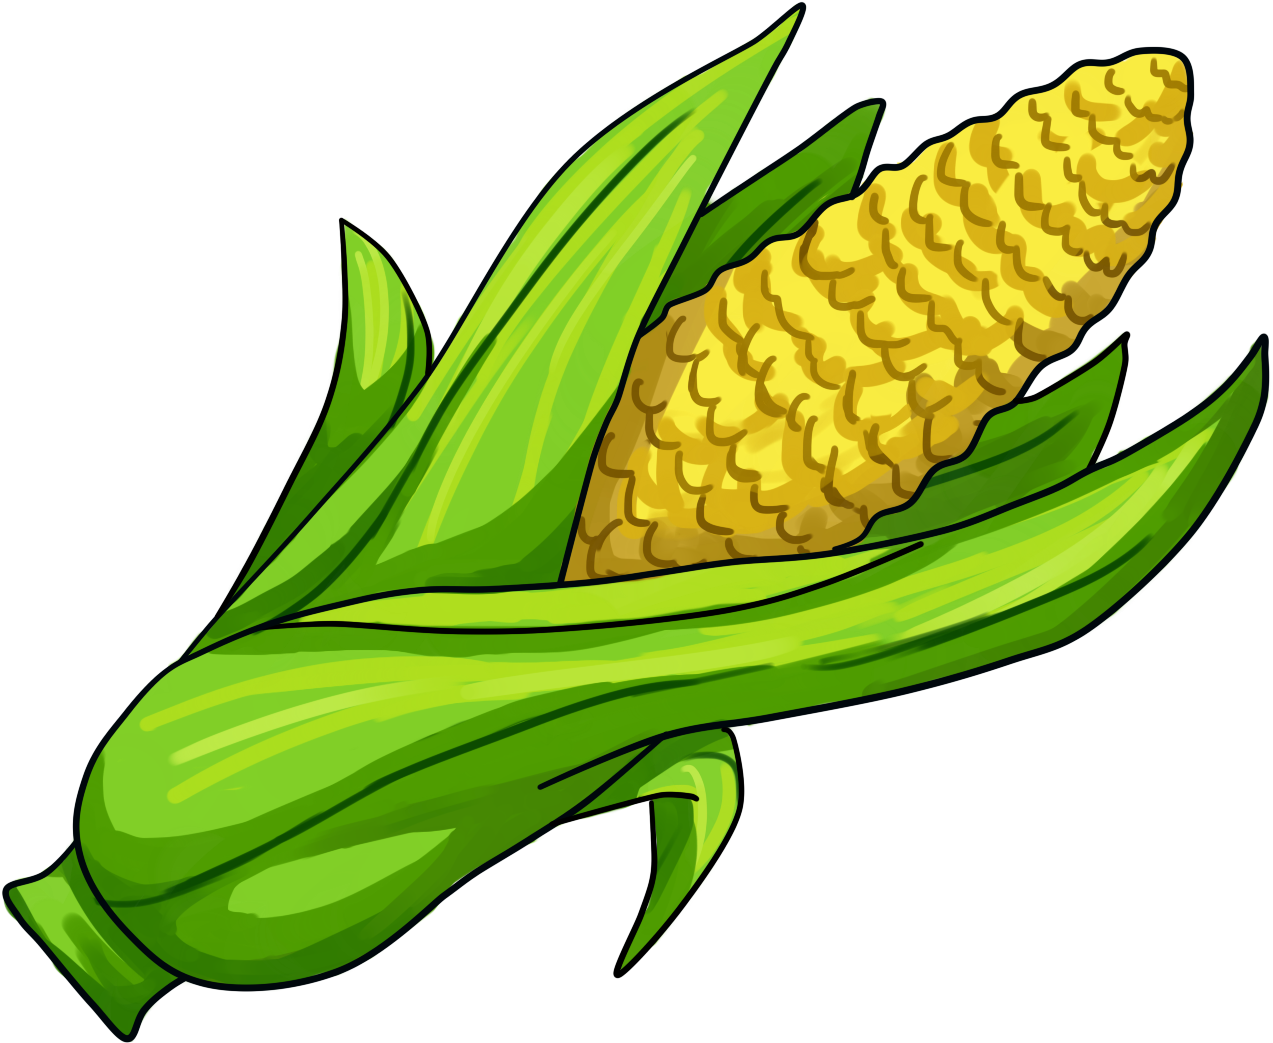 Maize Corn On The Cob Drawing PNG Transparent Image